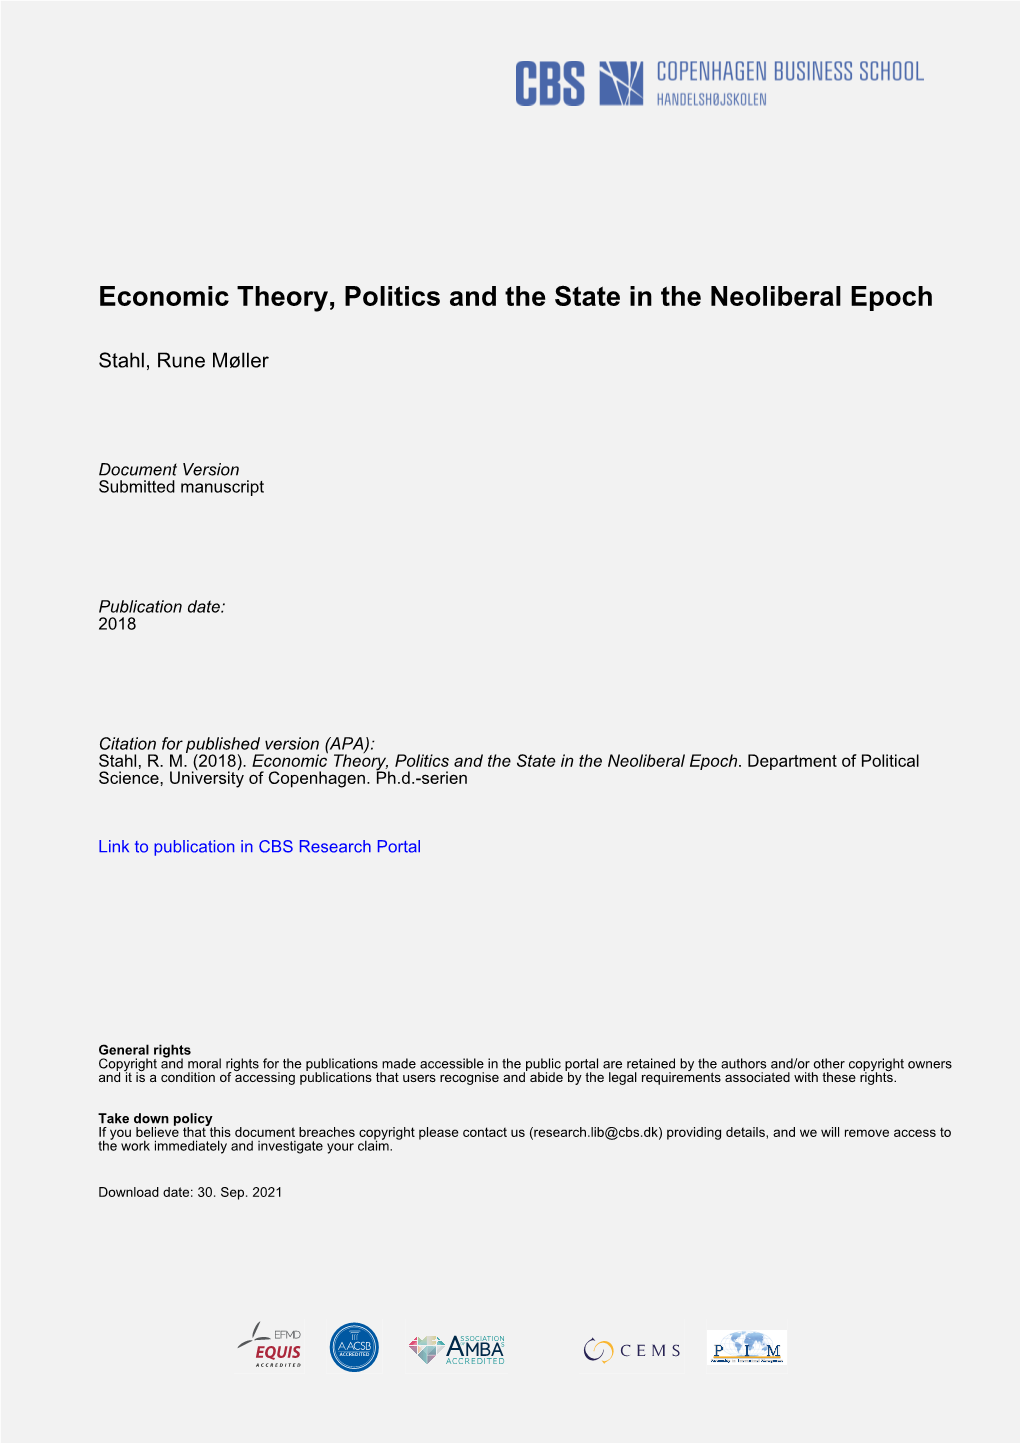 Economic Theory, Politics and the State in the Neoliberal Epoch